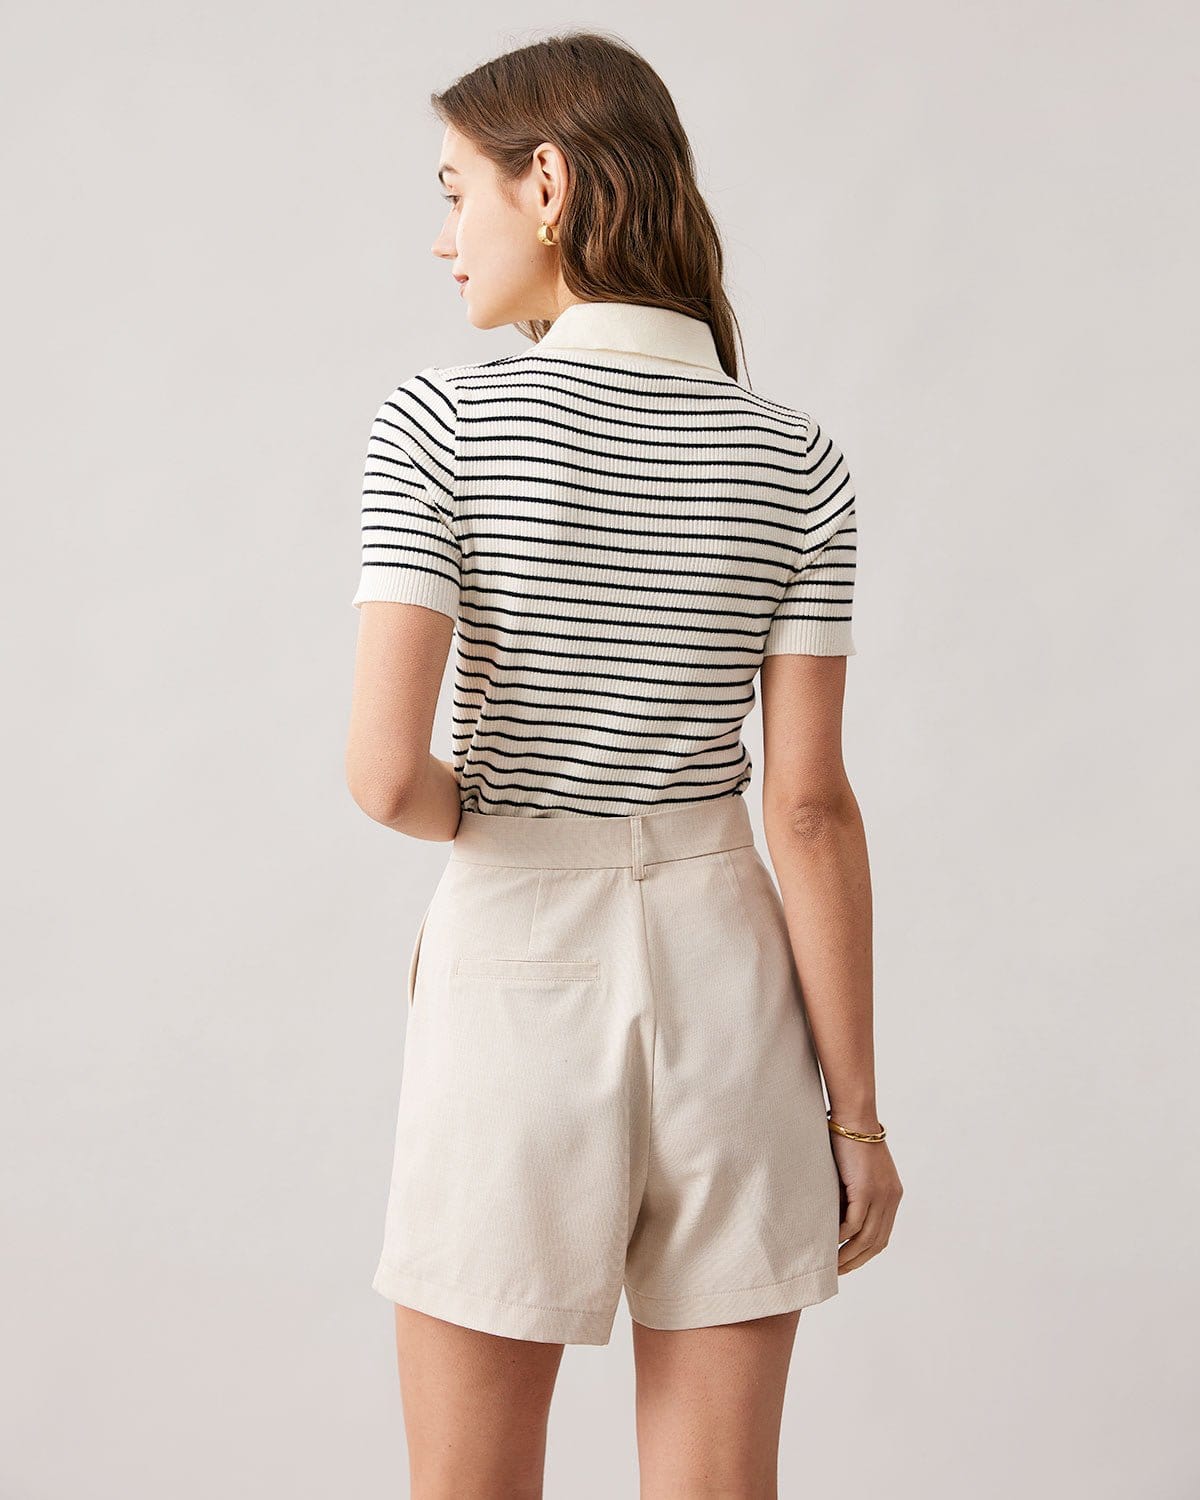 The Collared Stripe Knit Top Tops - RIHOAS